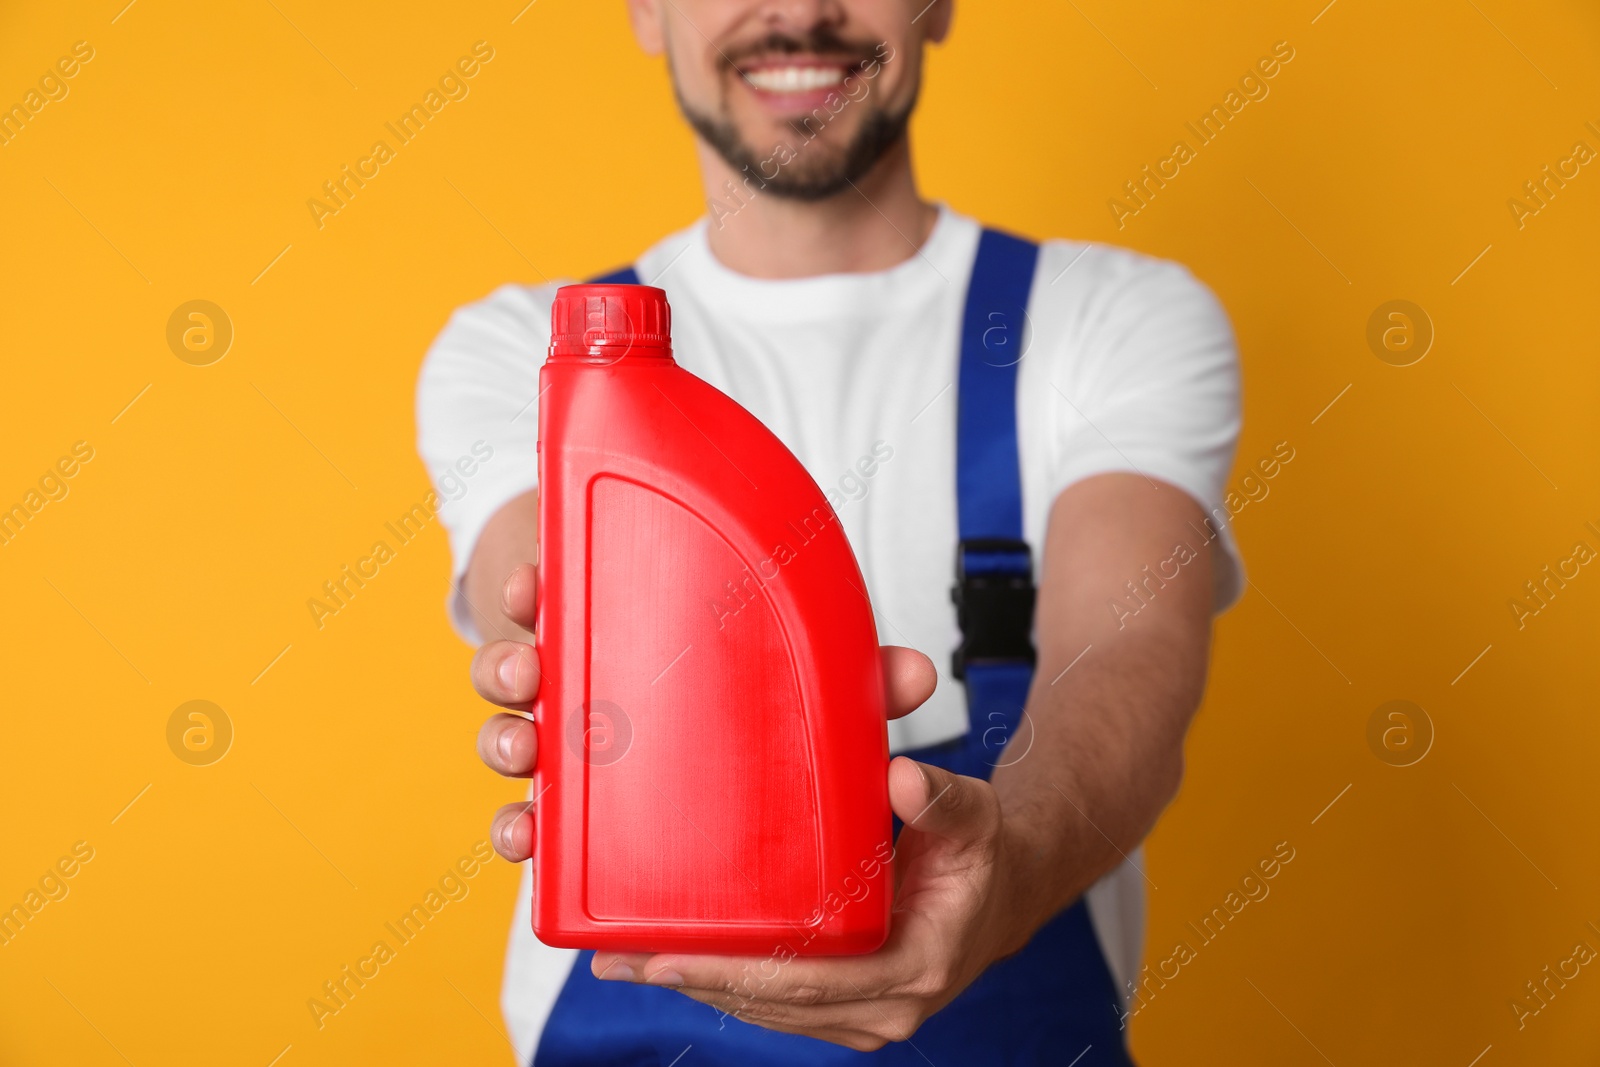 Photo of Man showing red container of motor oil on orange background, closeup